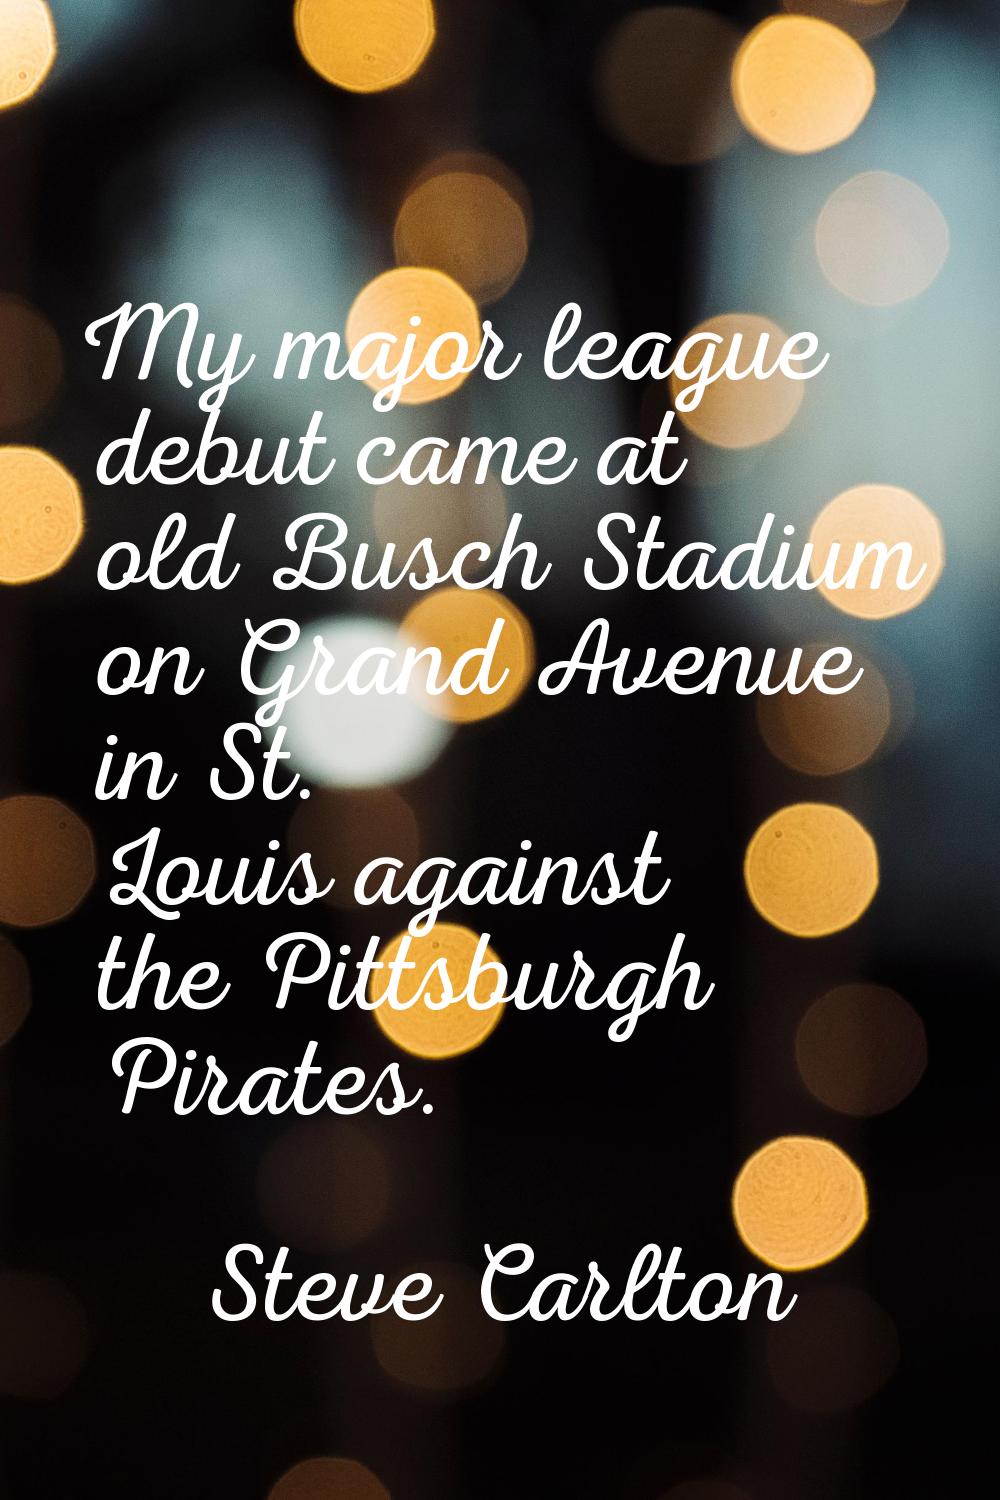 My major league debut came at old Busch Stadium on Grand Avenue in St. Louis against the Pittsburgh